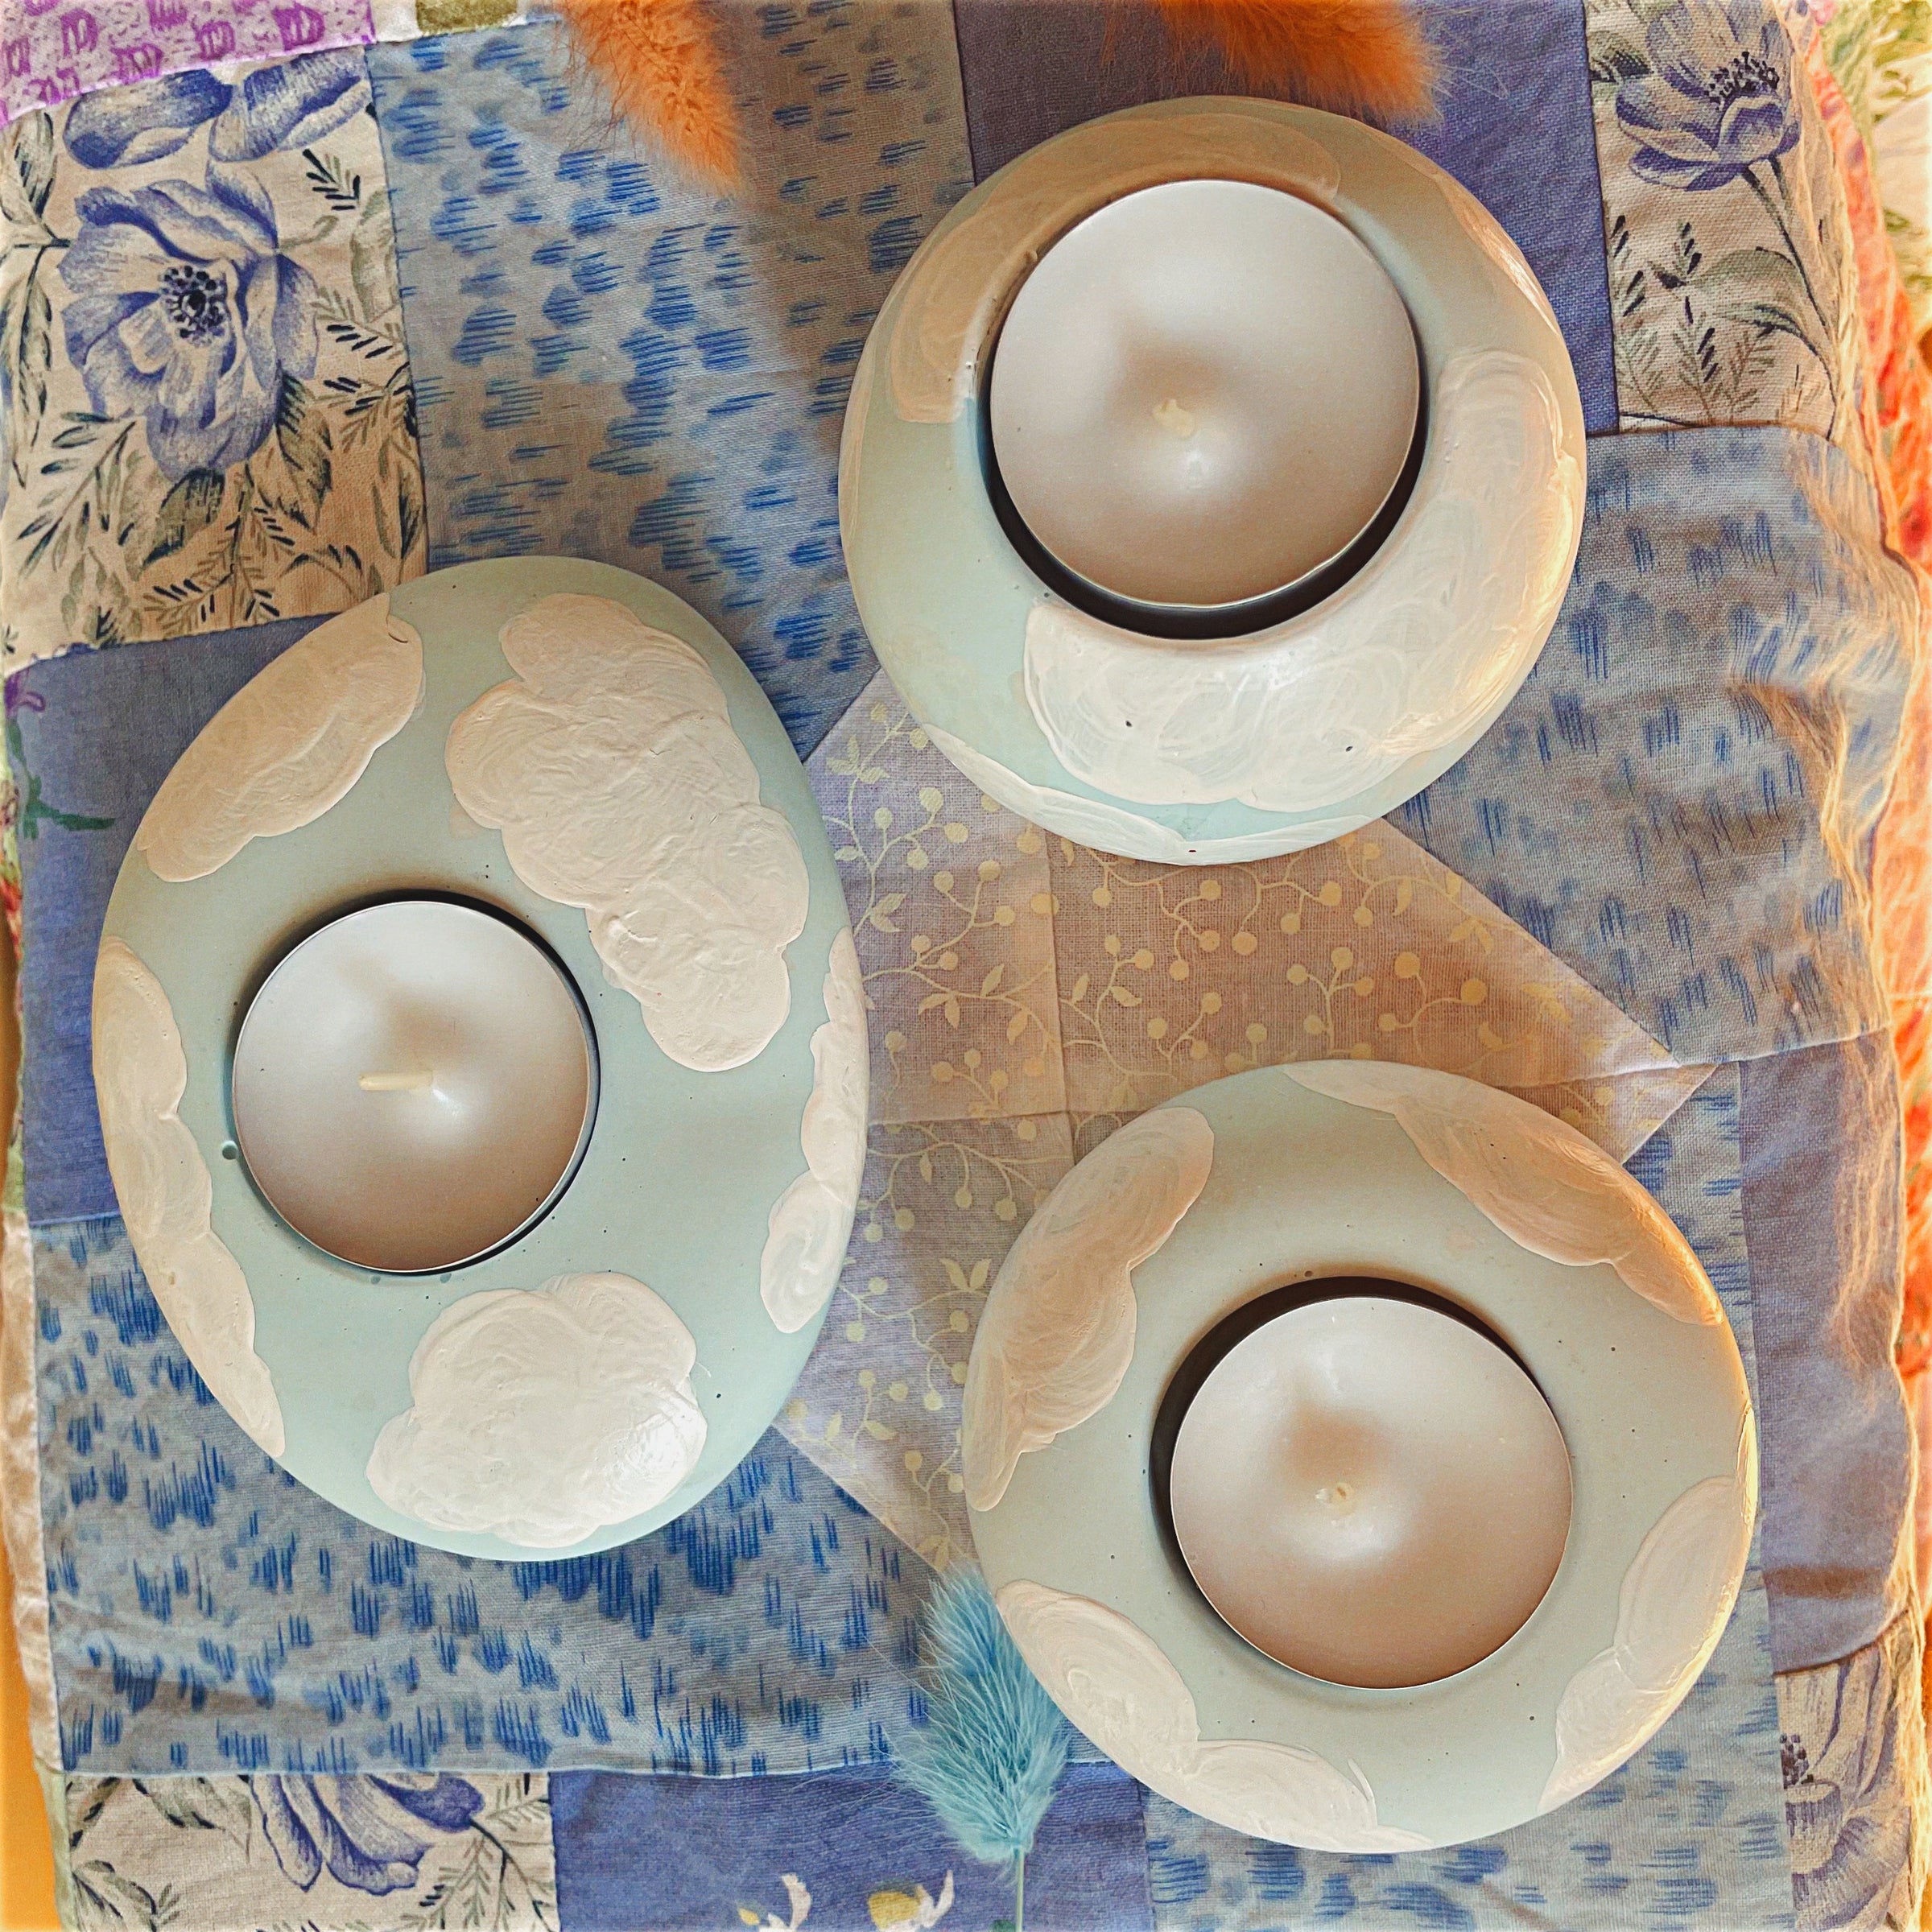 candle holder set, candle holder centerpiece, jesmonite candles, cloudy candle holder, cloud home decor, tealight candle holder, tealights, concrete candle holder, concrete handle